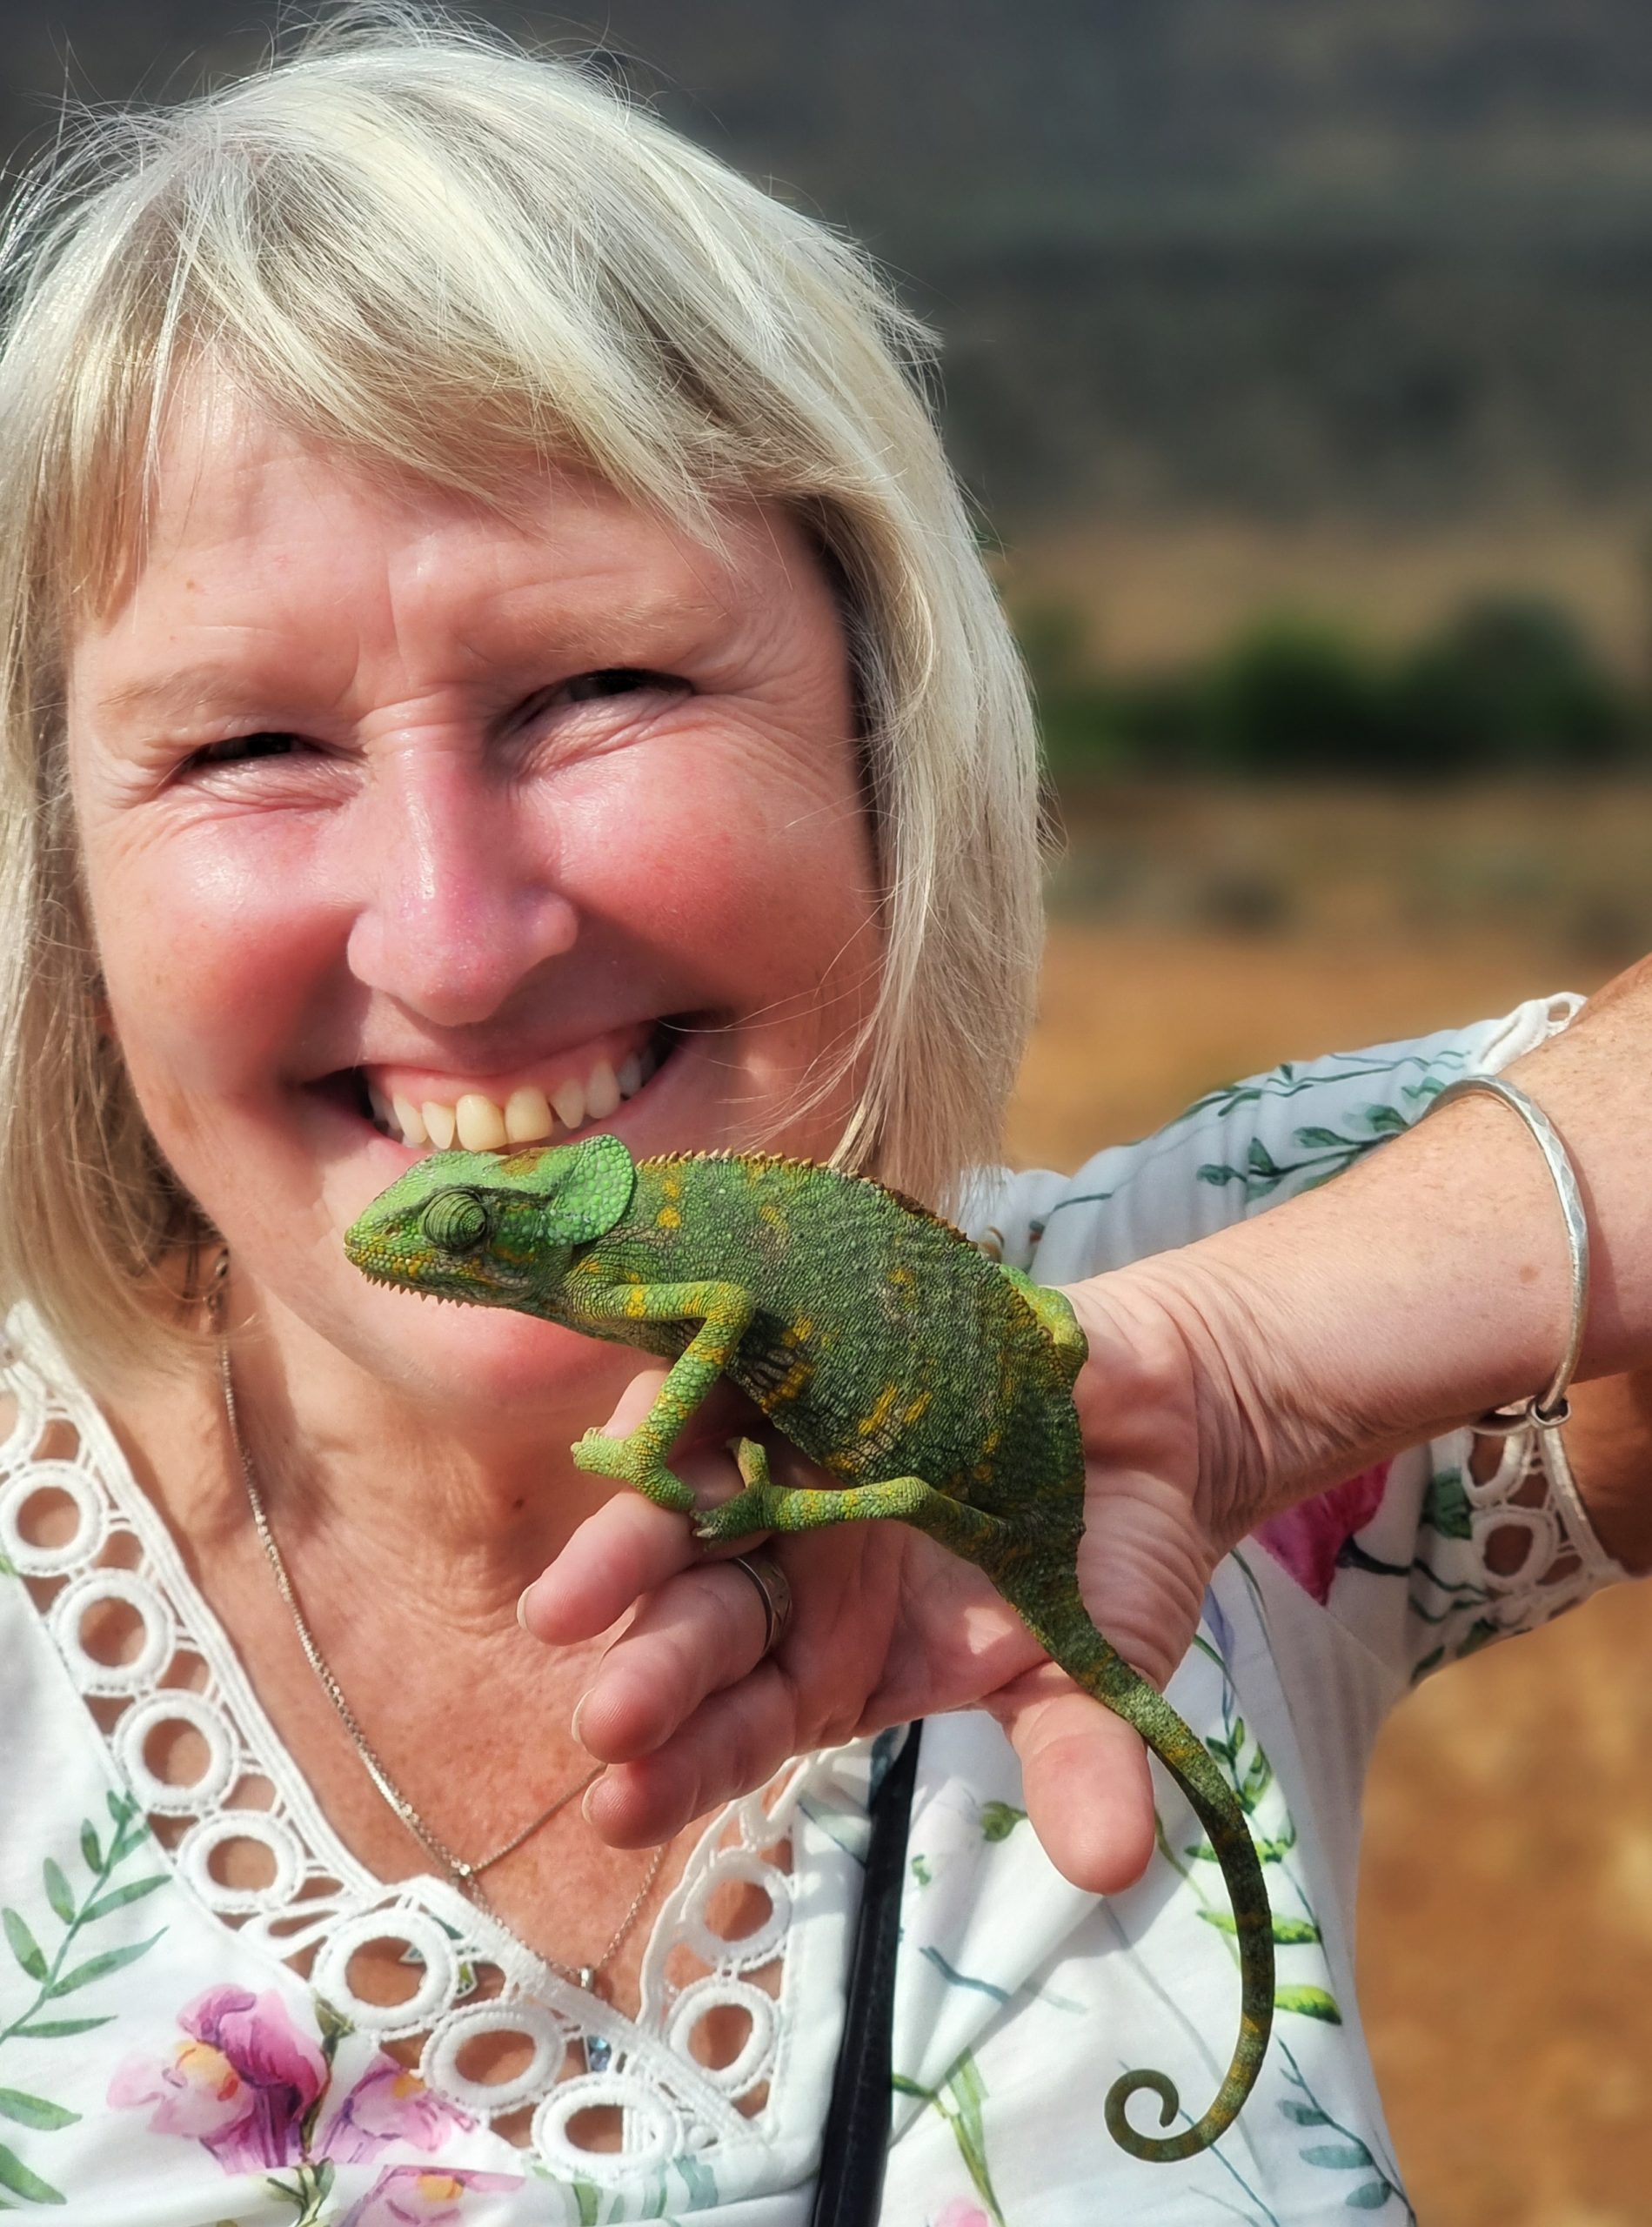 Me with a friendly chameleons in Socotra